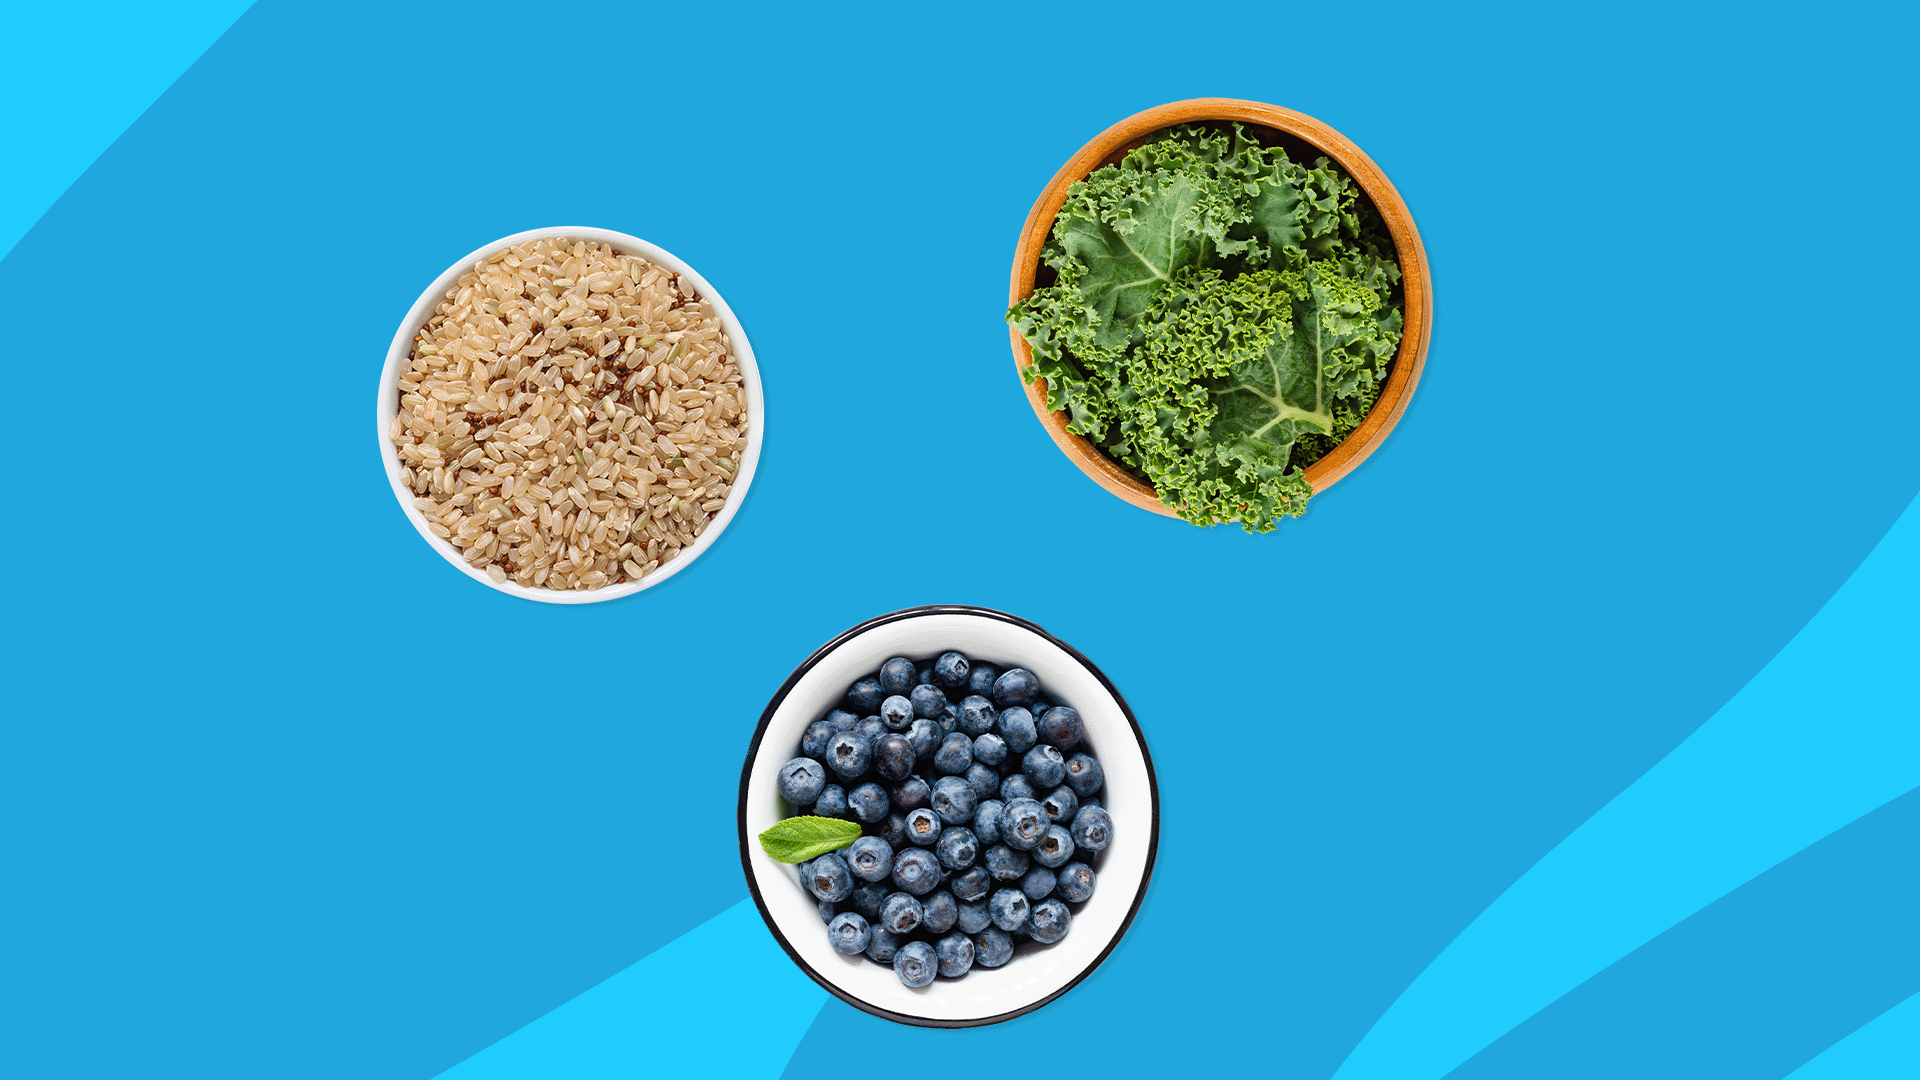 An image of foods for arthritis (blueberries, whole grains, and greens)